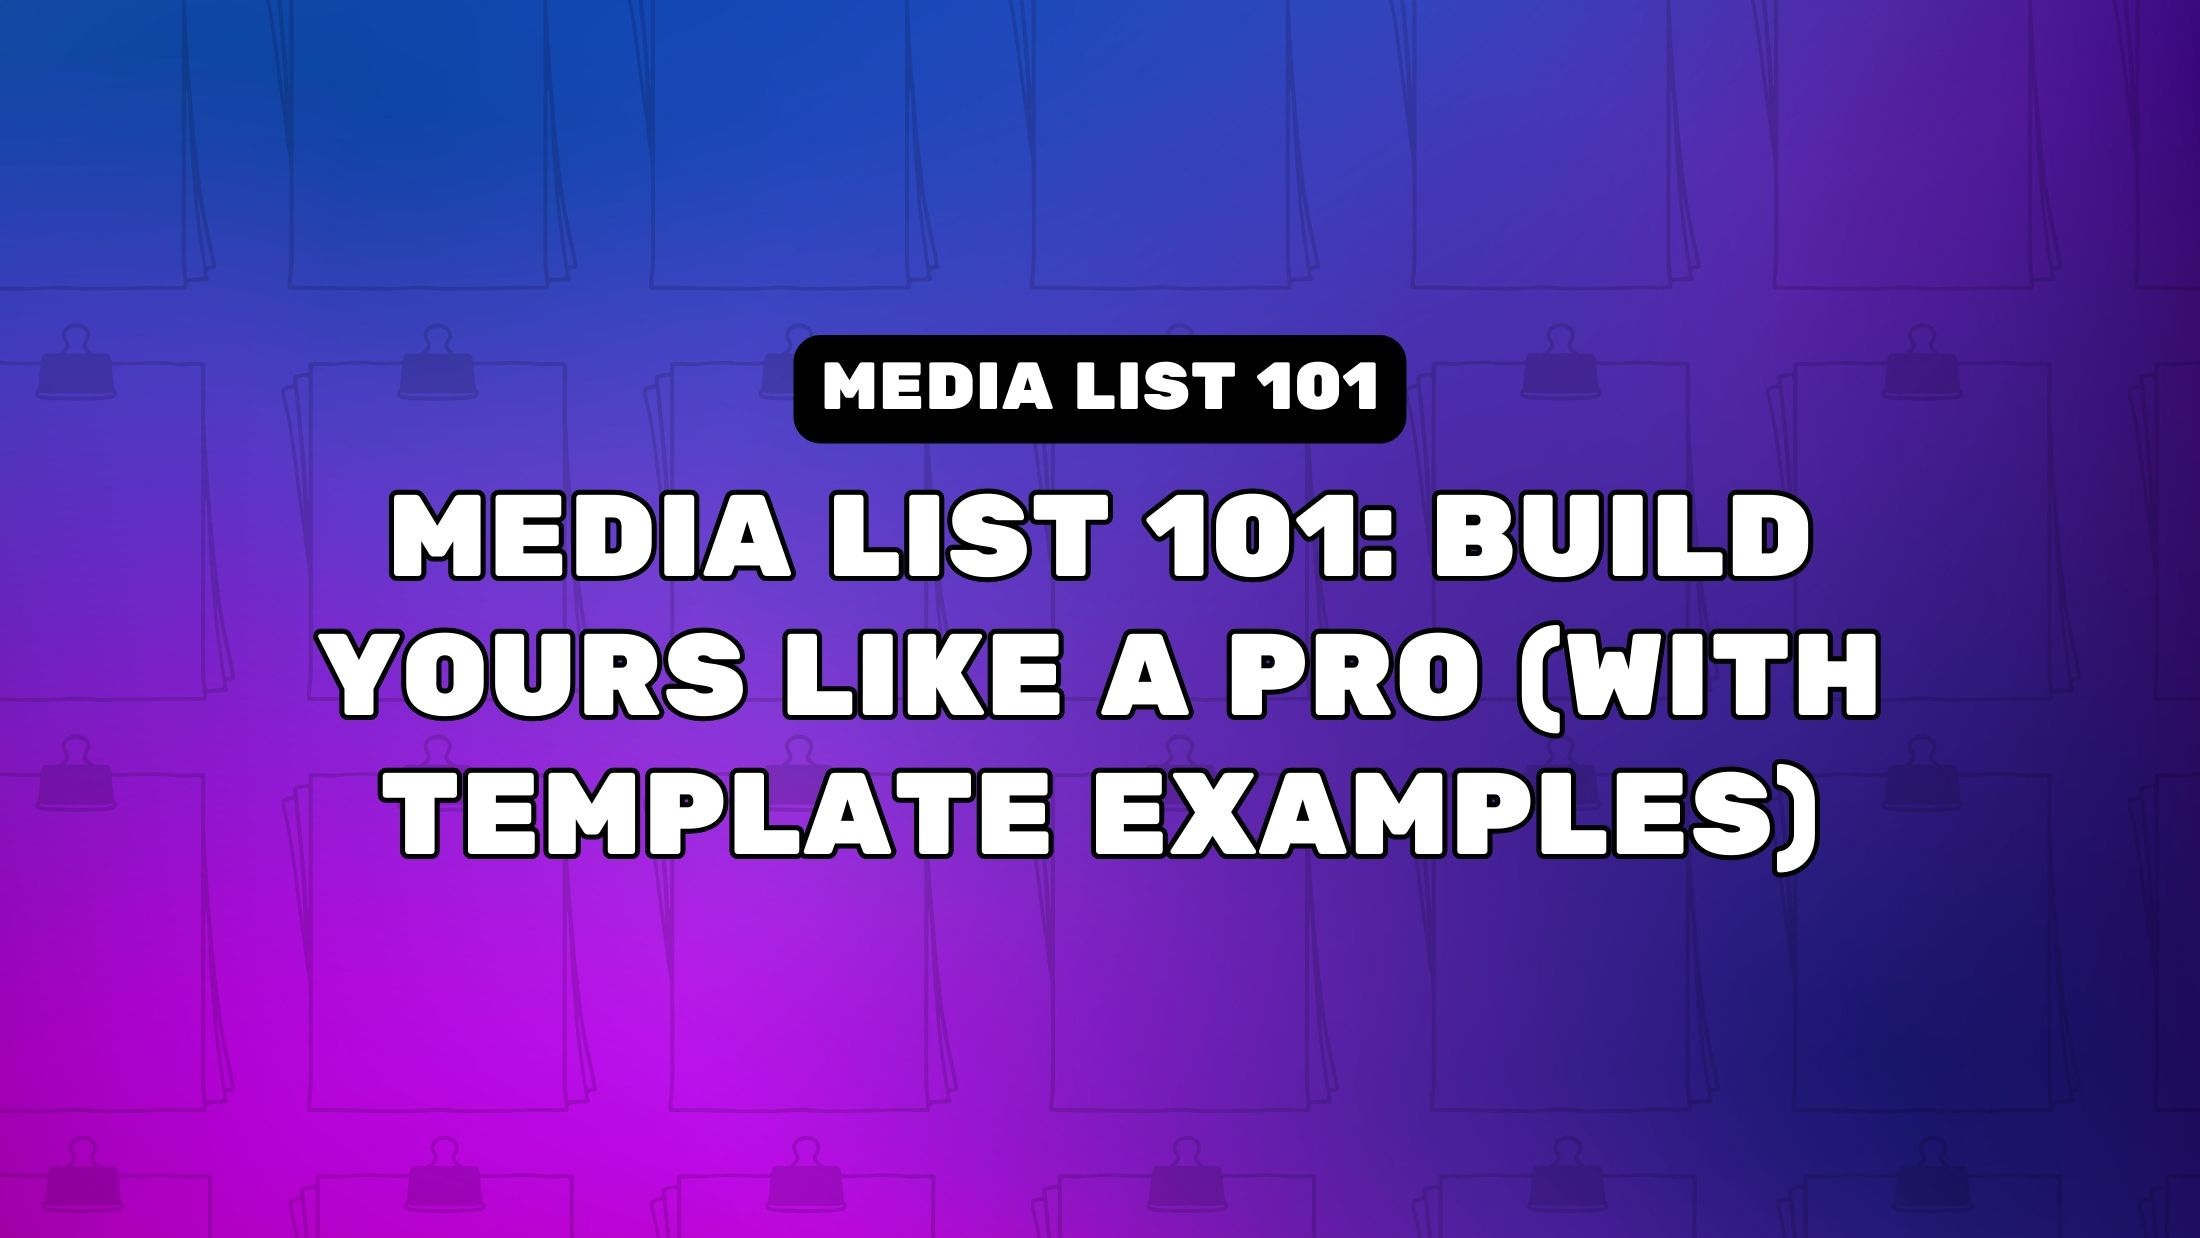 Media List 101: Build Yours Like a Pro (With Template Examples)